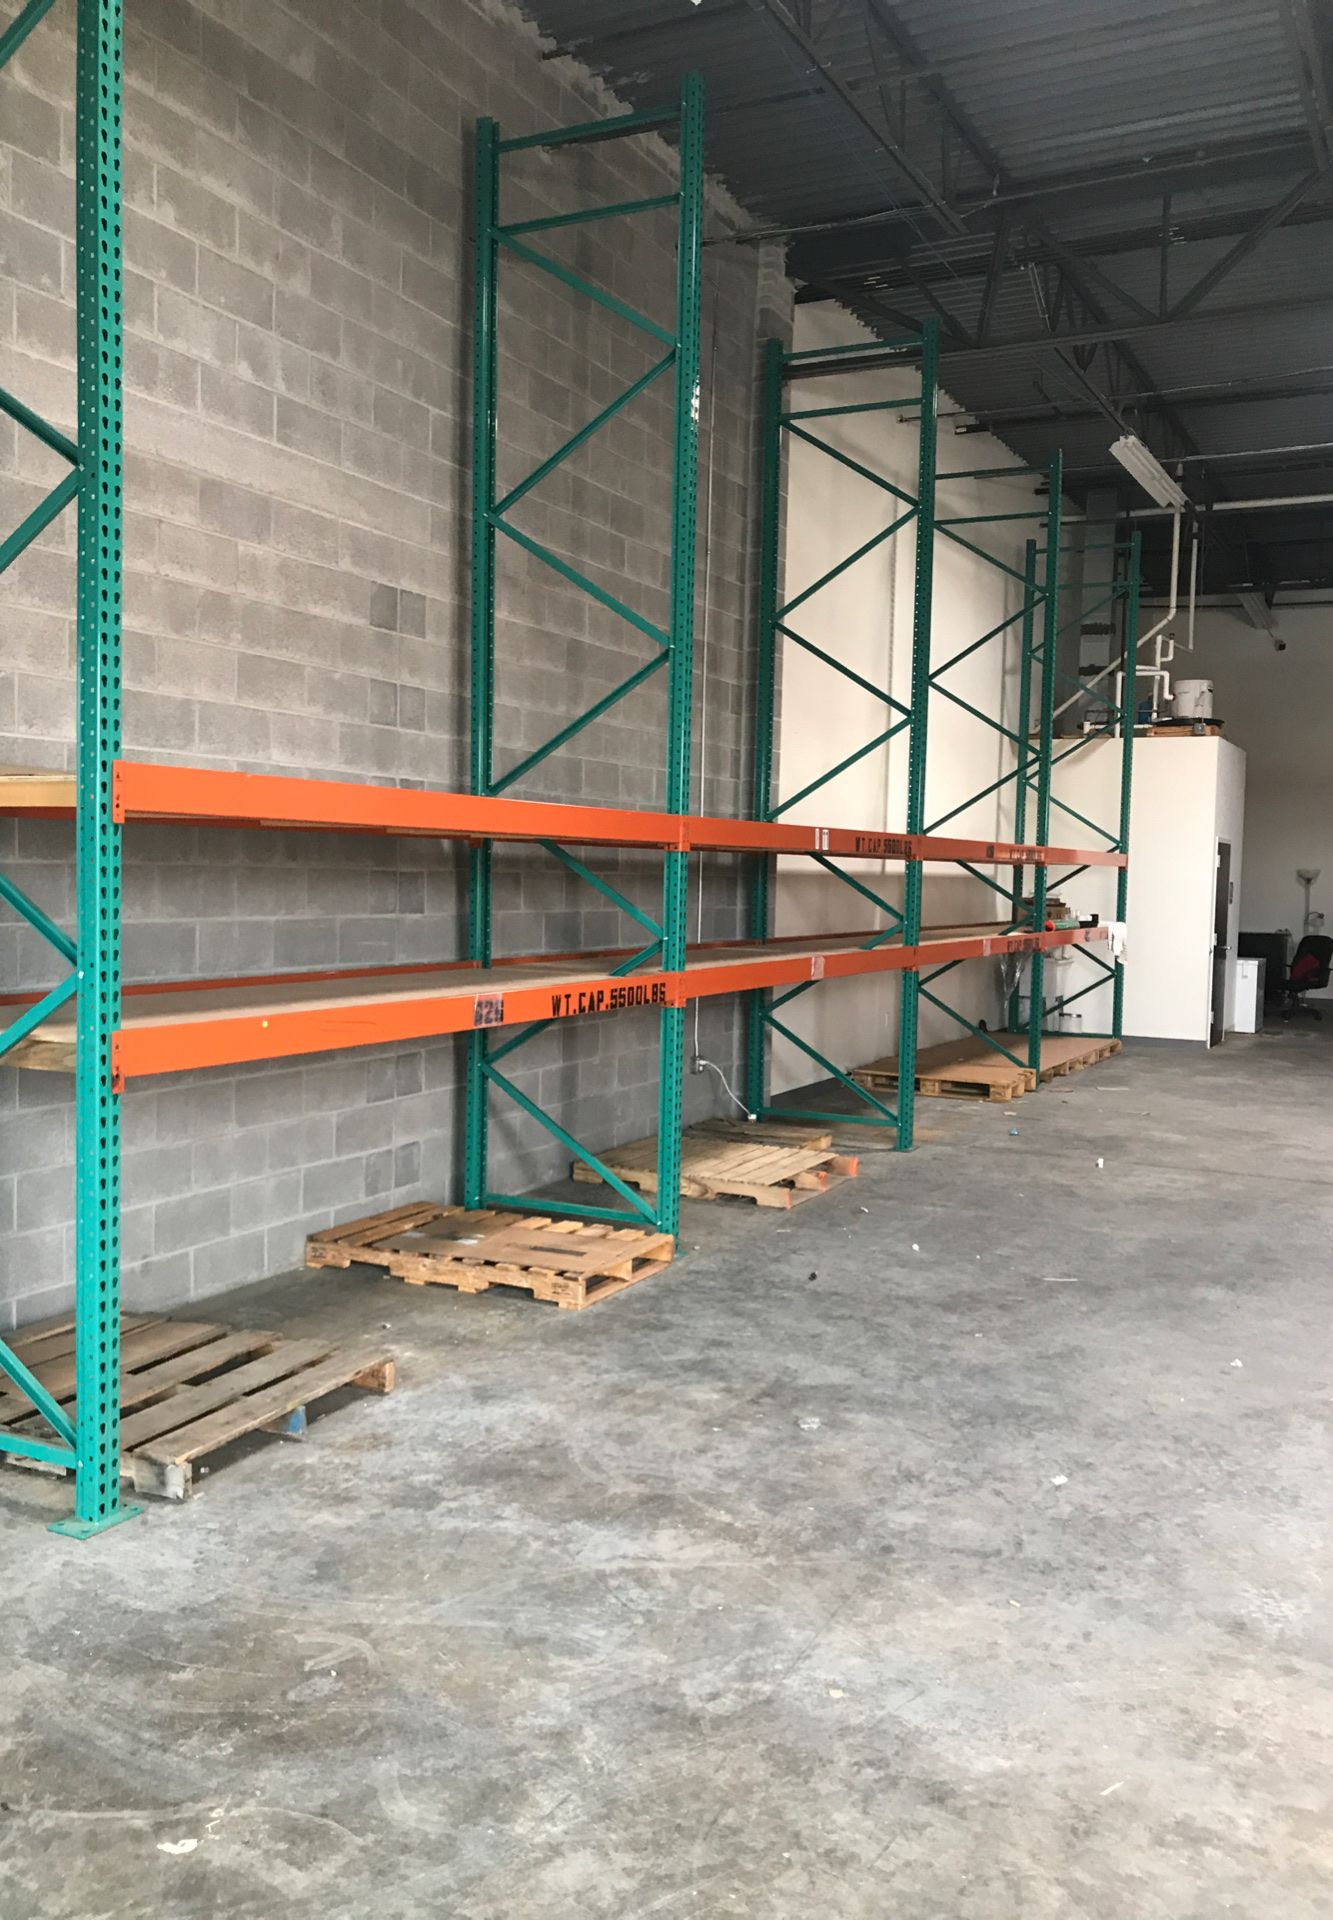 16’ commercial racks with 12’ and 10’ beams